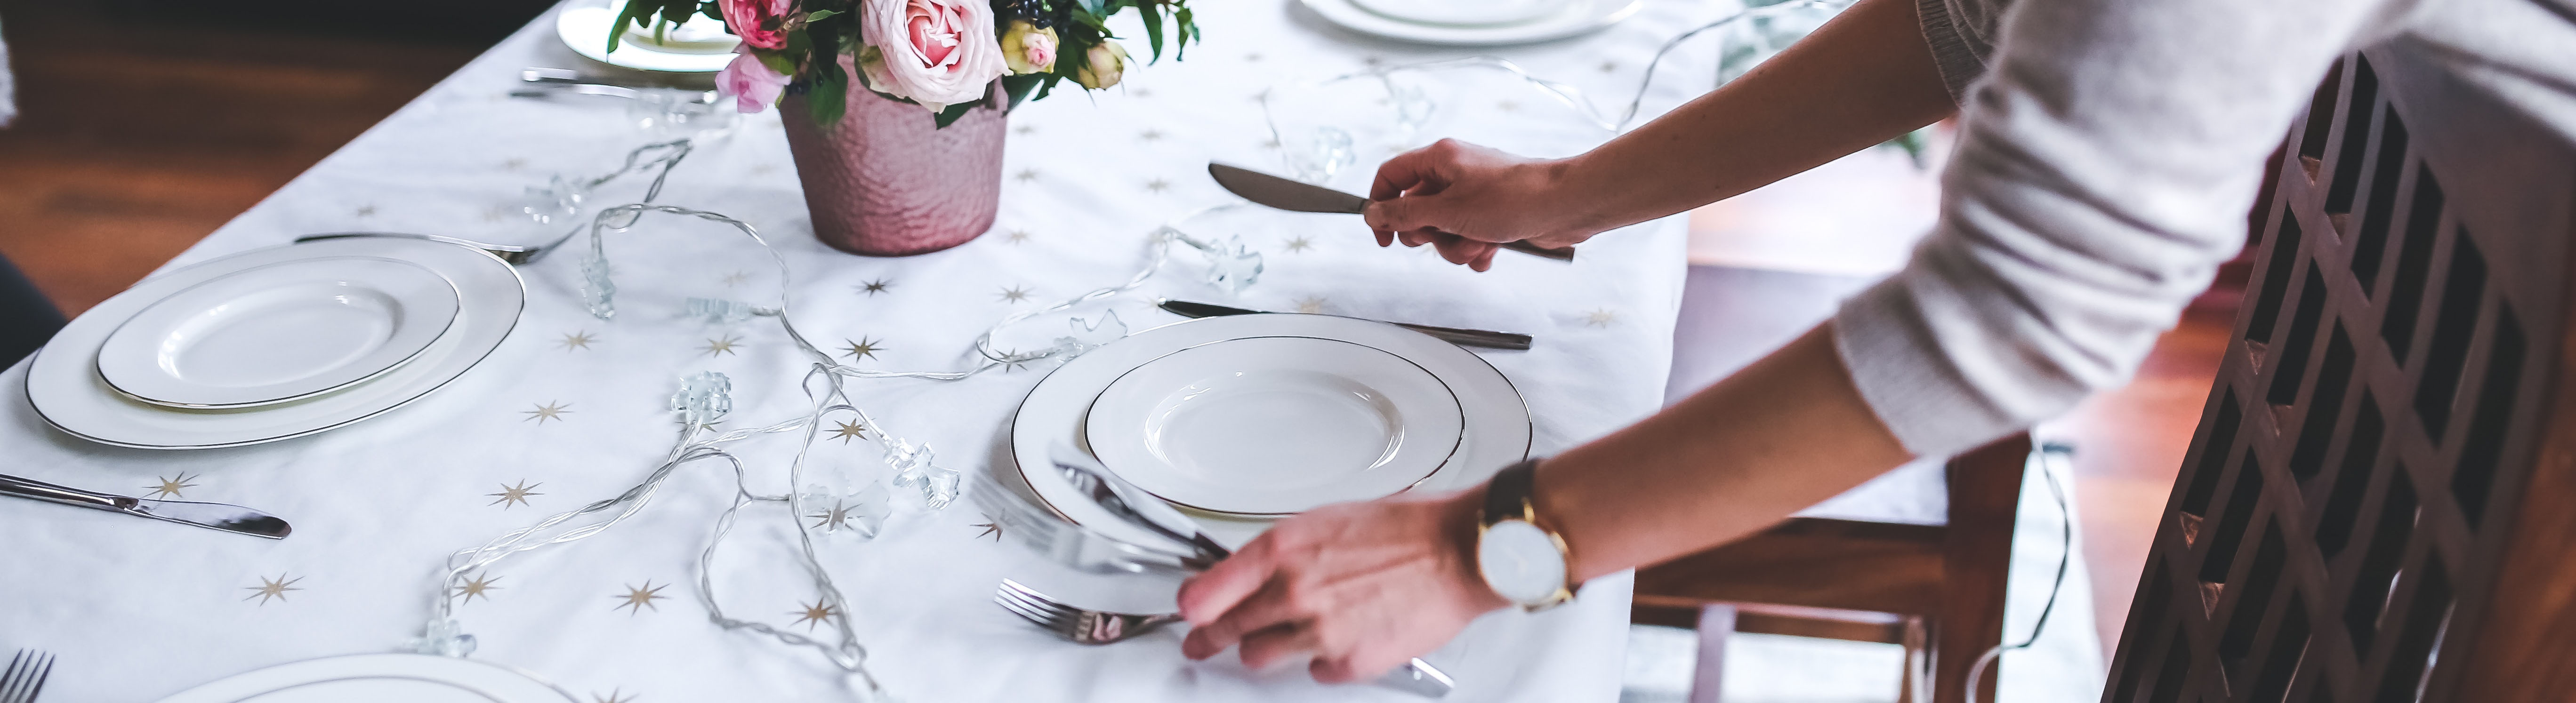 Fine Dining Etiquette: What Is The Proper Way To Use A Table Napkin?